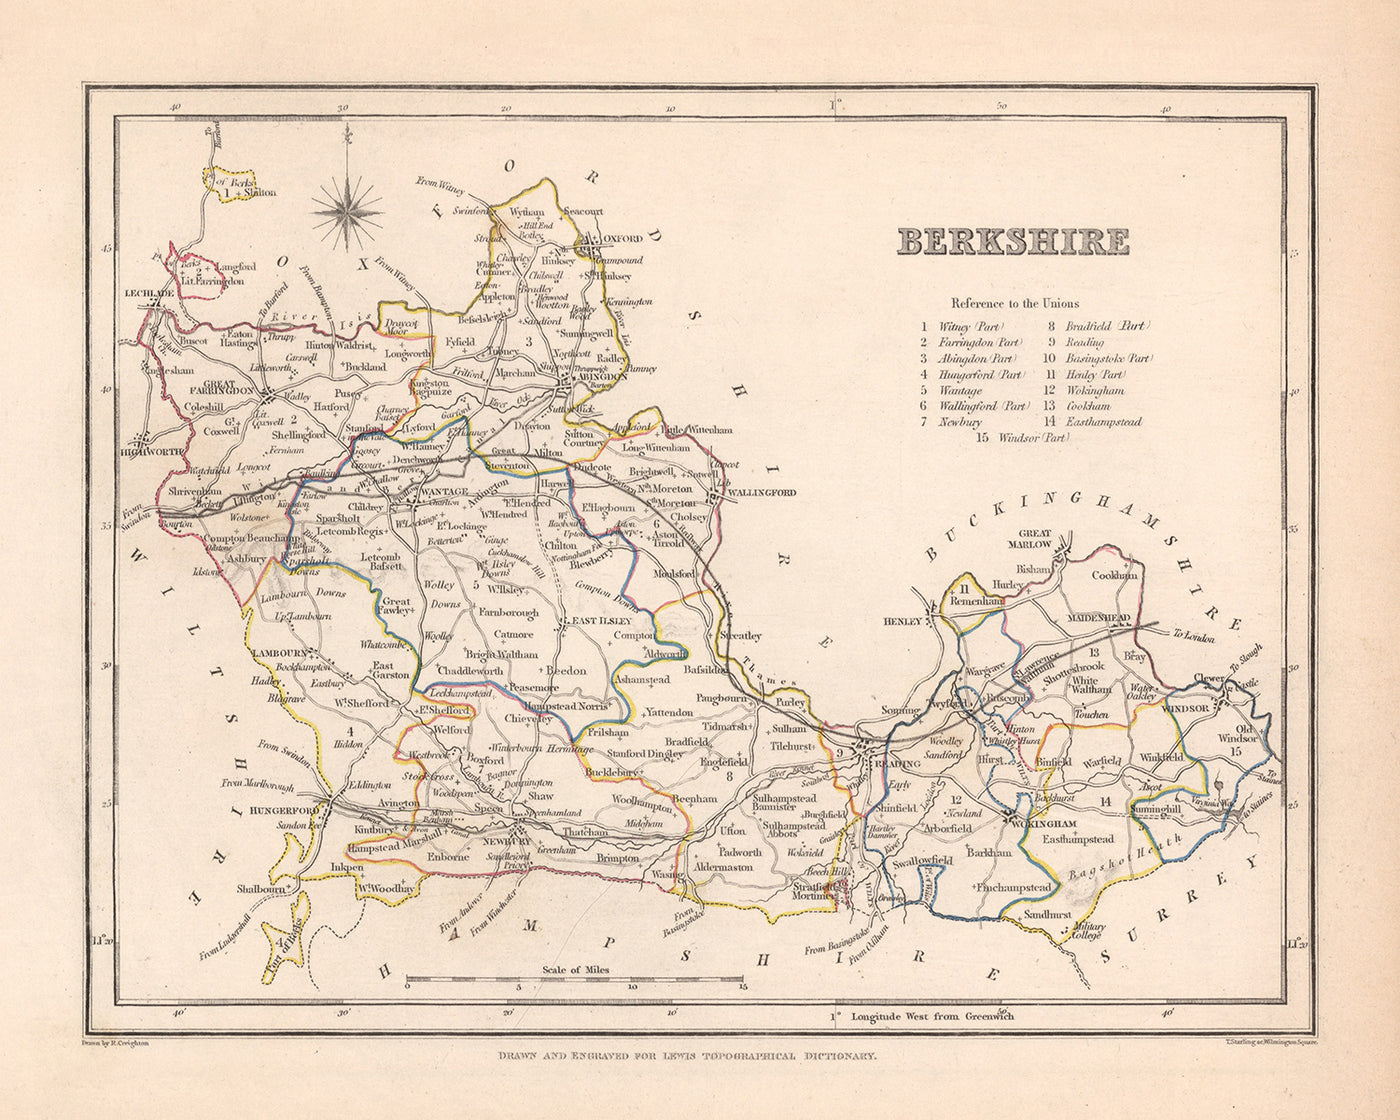 Old Map of Berkshire by Samuel Lewis, 1844: Reading, Windsor, Newbury, Abingdon, and Henley-on-Thames